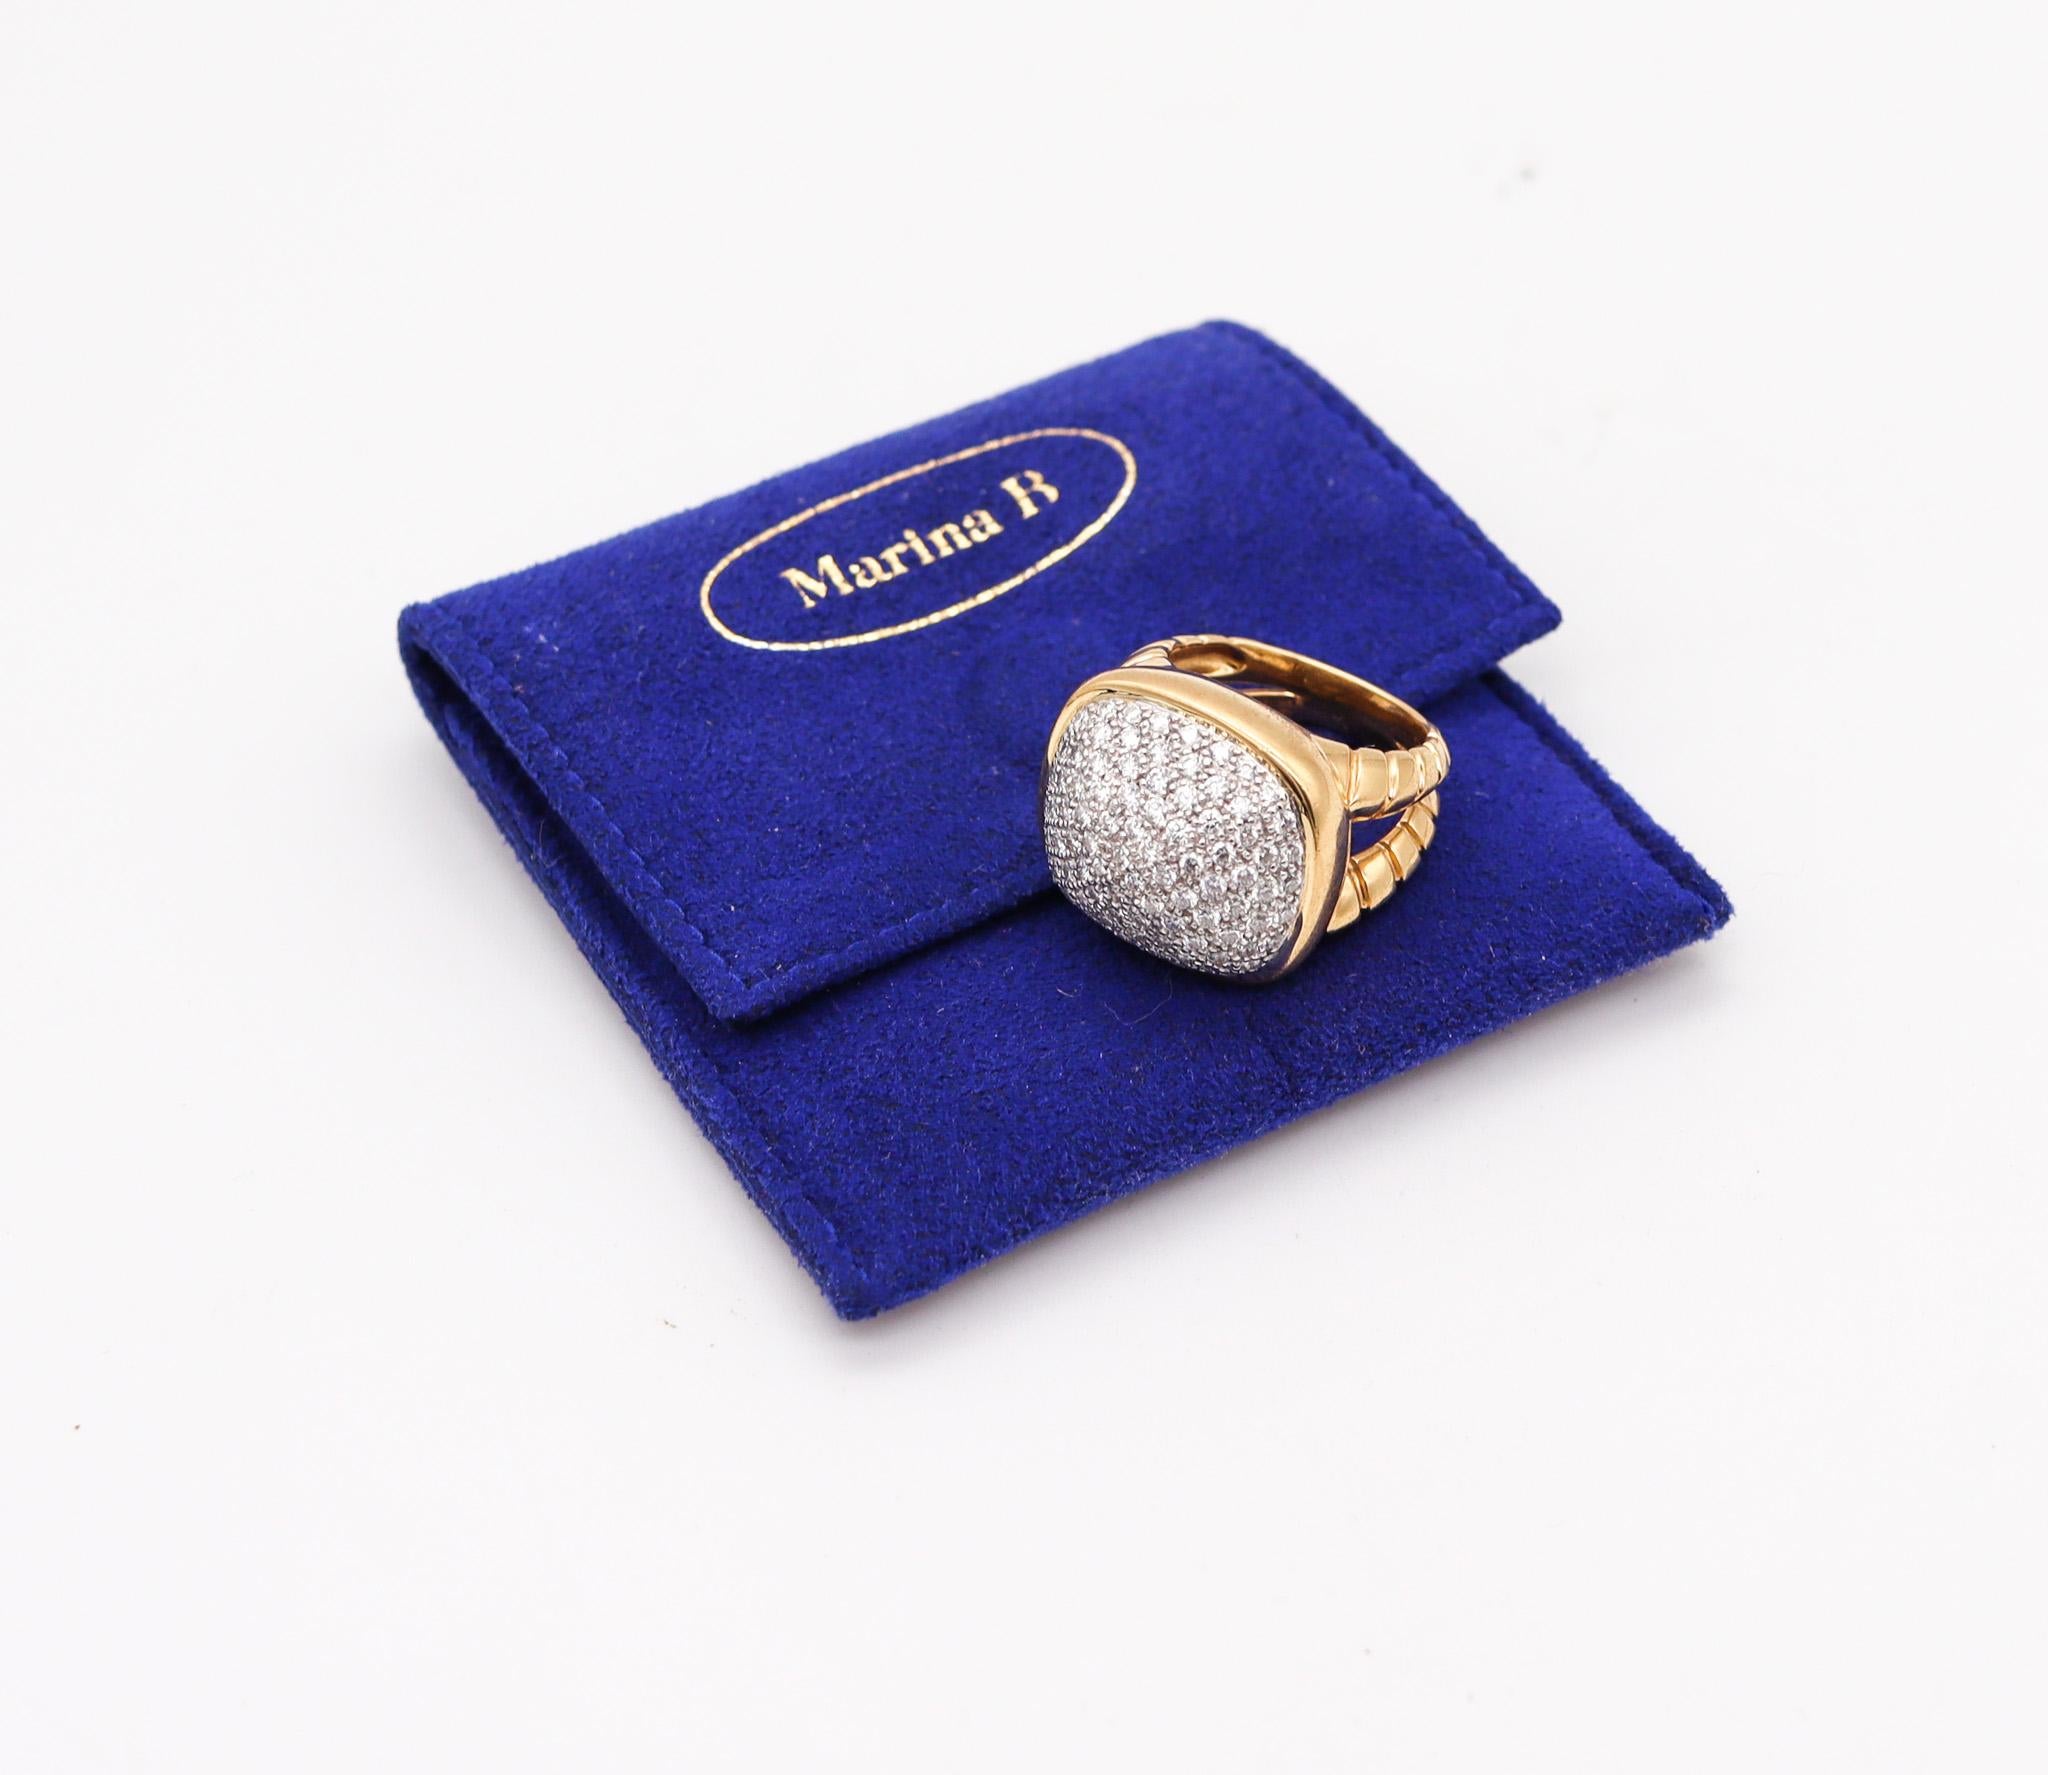 Marina B. Milano Tiguella Pave Cocktail Ring in 18kt Gold with 2.55ctw Diamonds For Sale 2